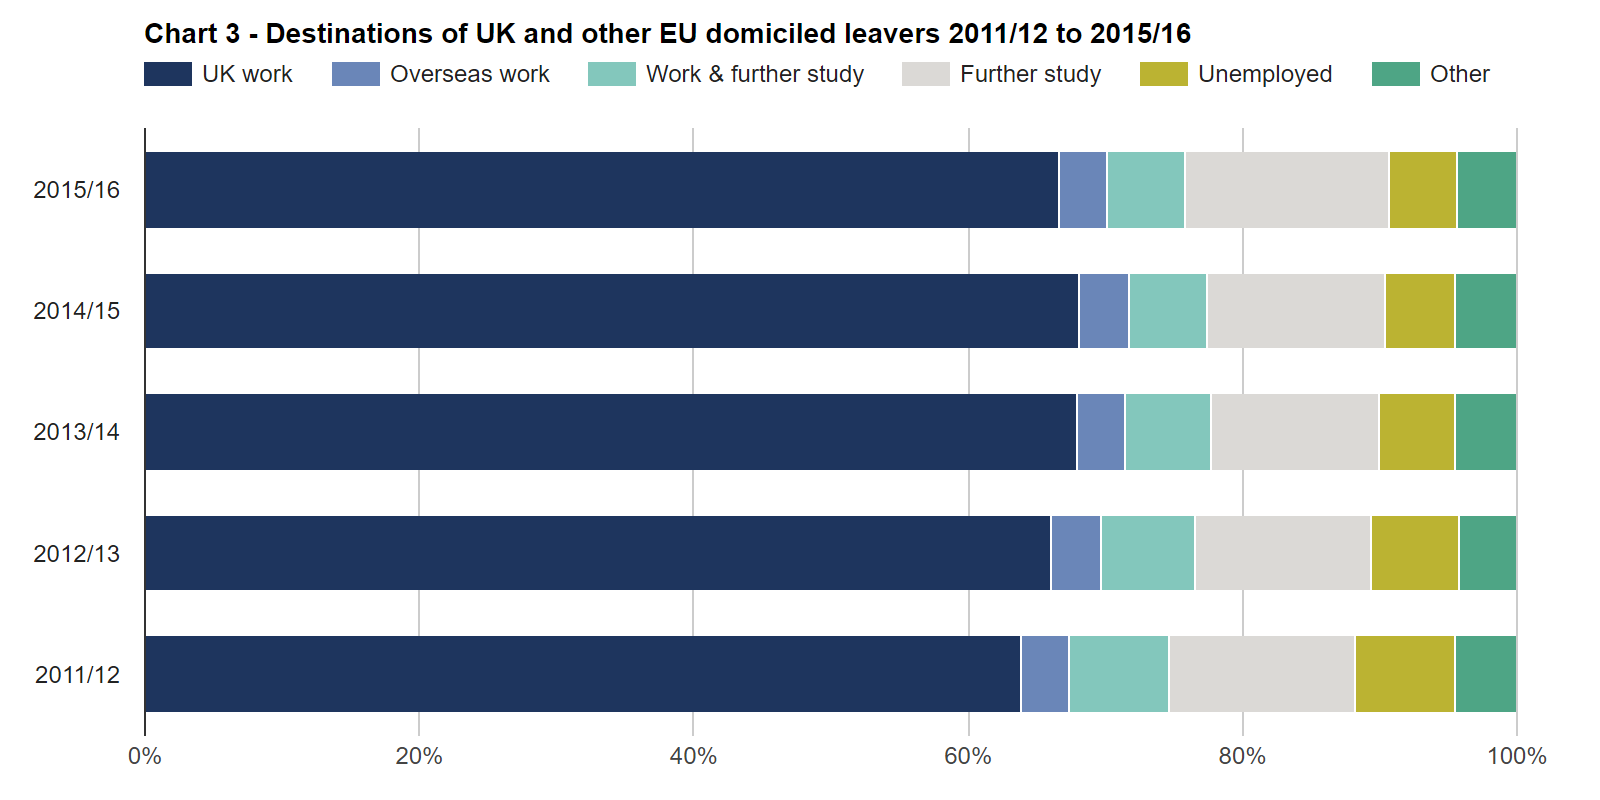 SFR245: Chart 3 - Destinations of UK and other EU domiciled leavers 2011/12 to 2015/16